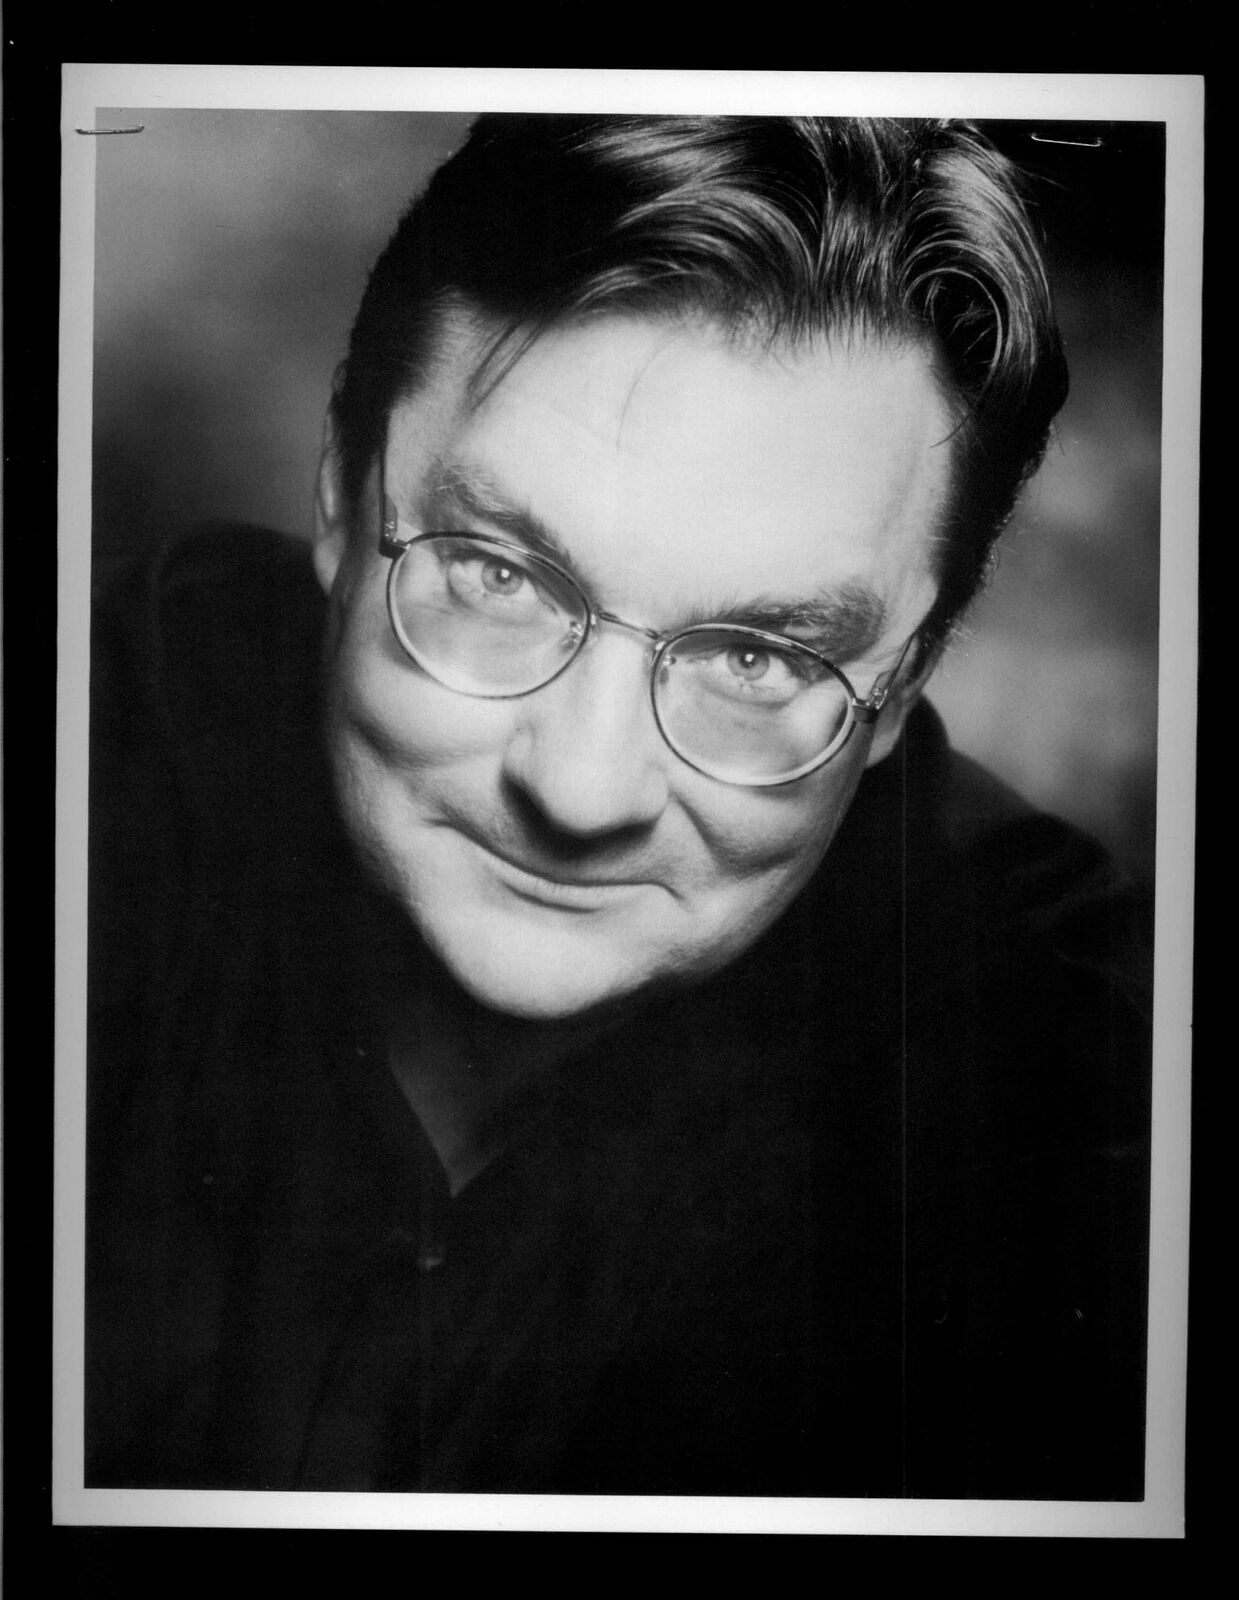 Stephen Root - 8x10 Headshot Photo Poster painting w/ Resume - Office Space